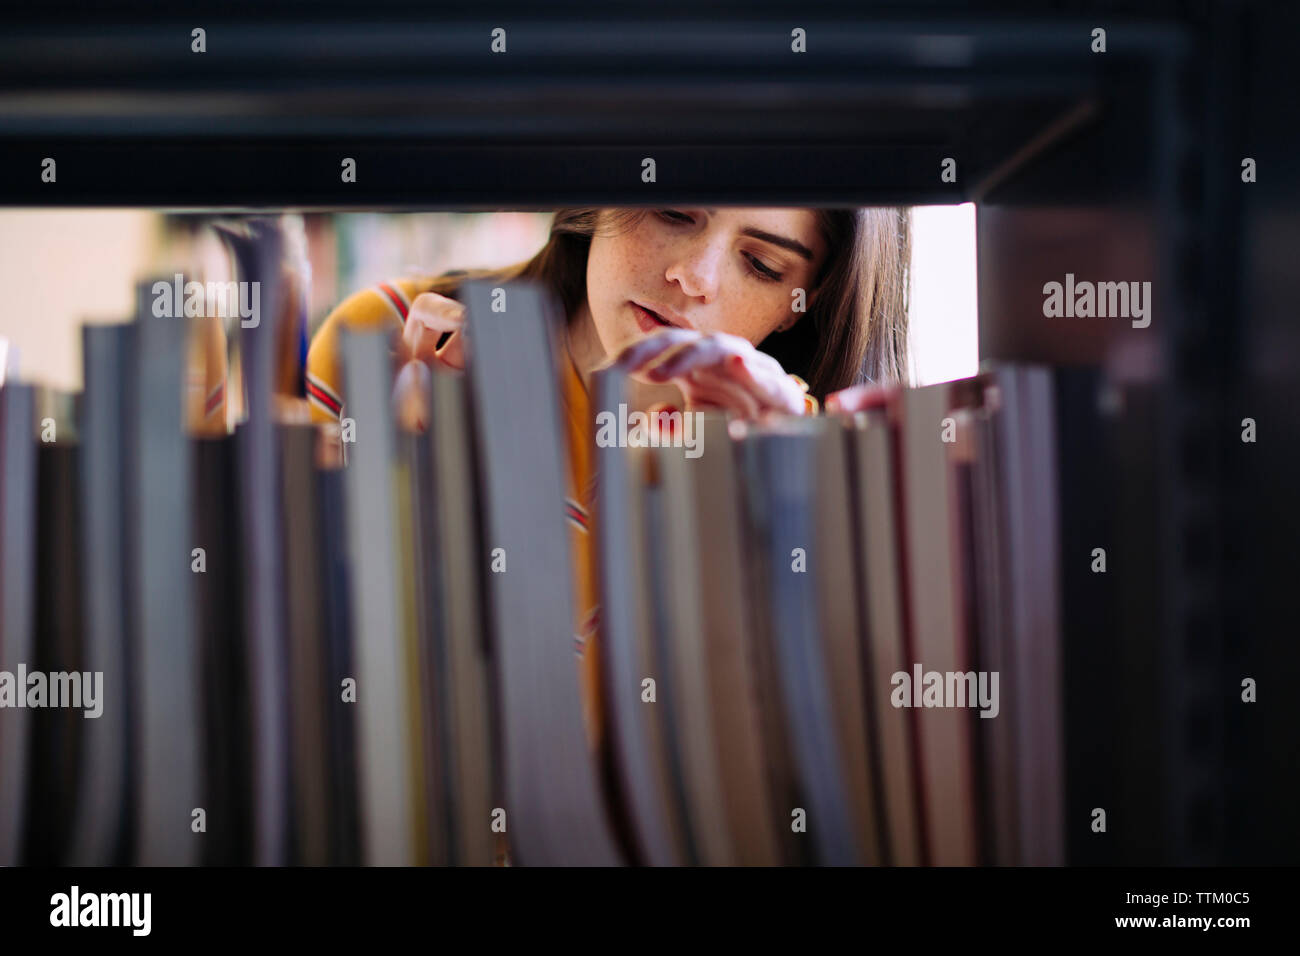 Woman searching books on shelf at library Stock Photo